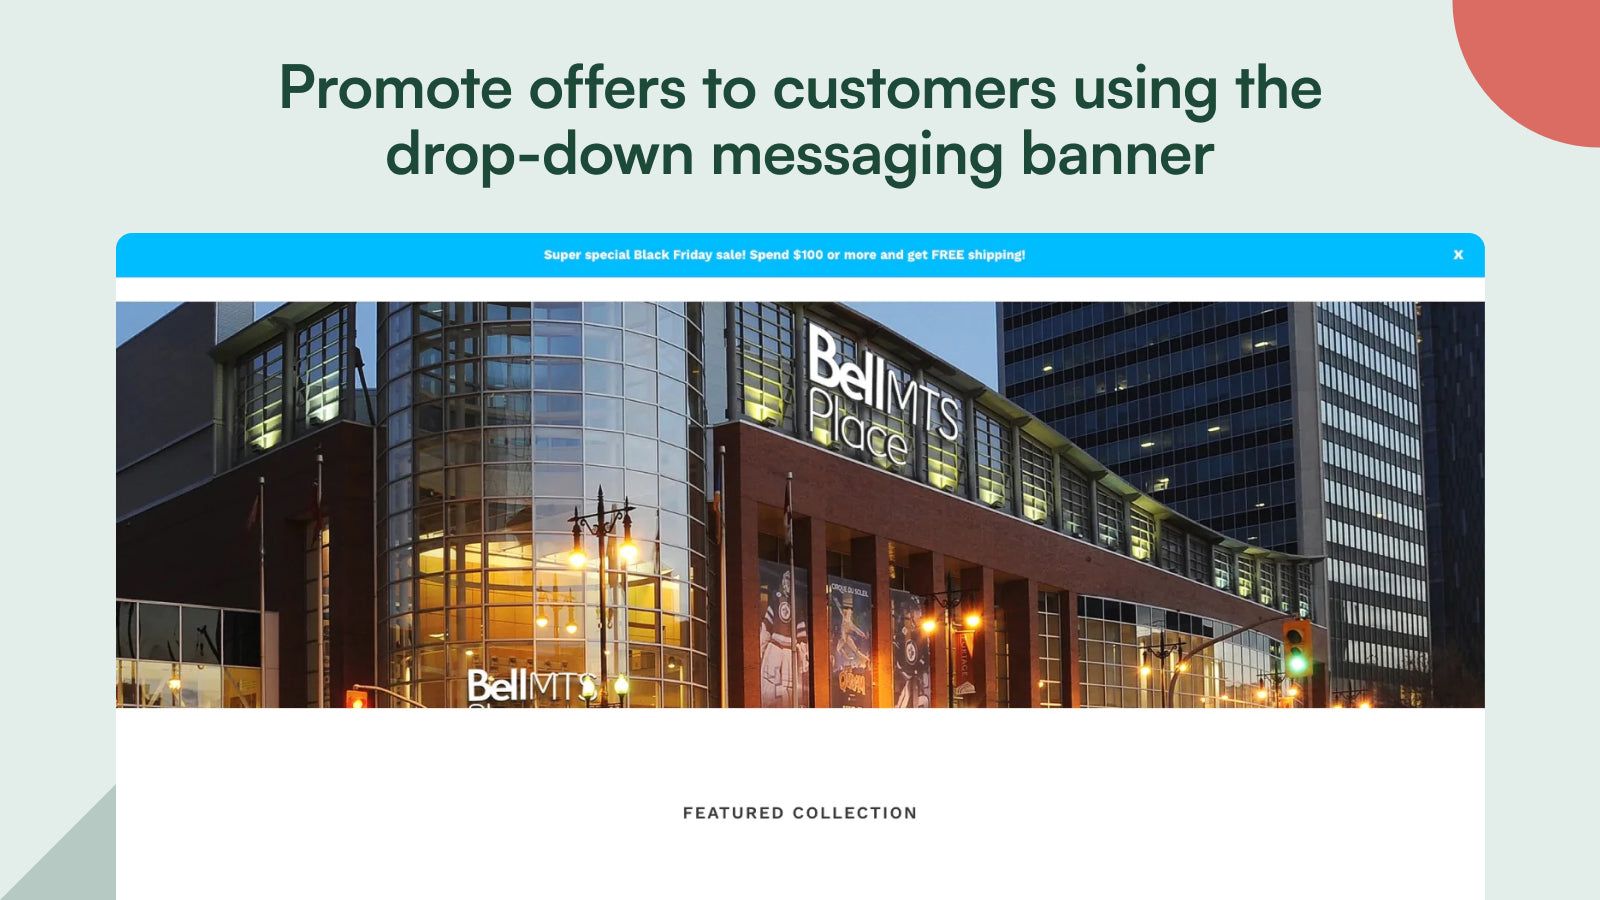 Show a welcome banner that promotes your offers to customers